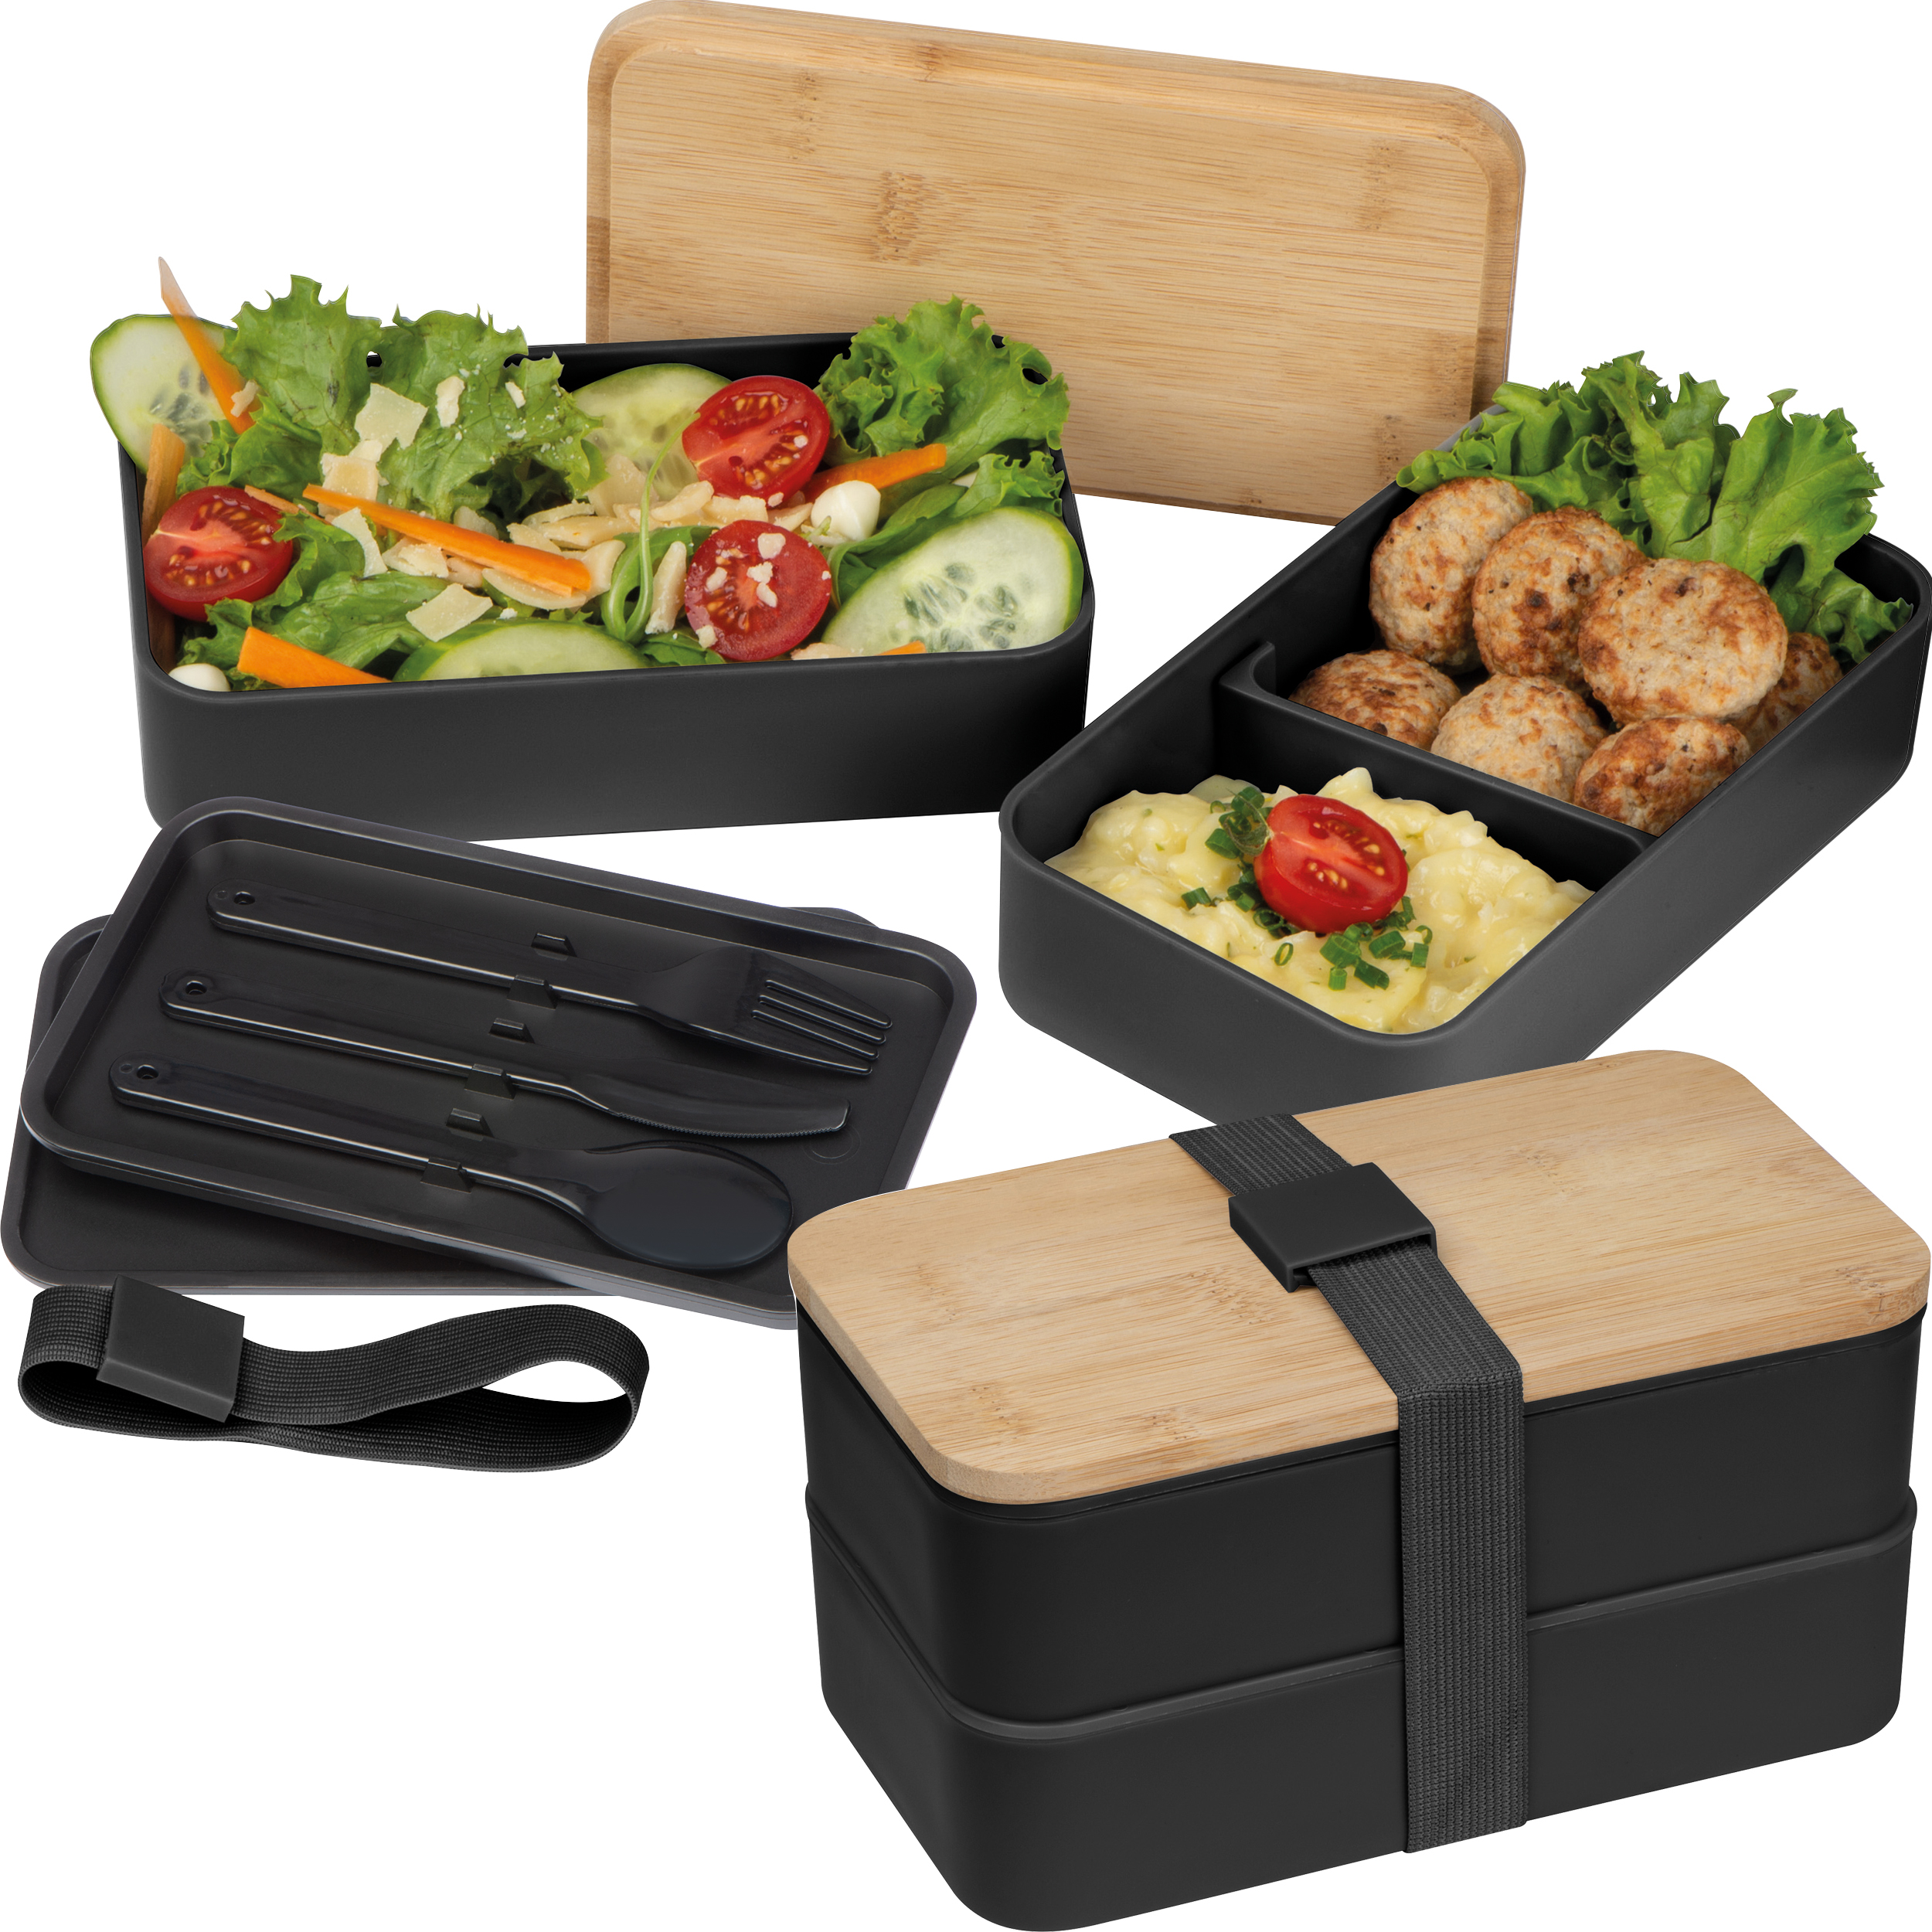 Lunchbox with two compartments